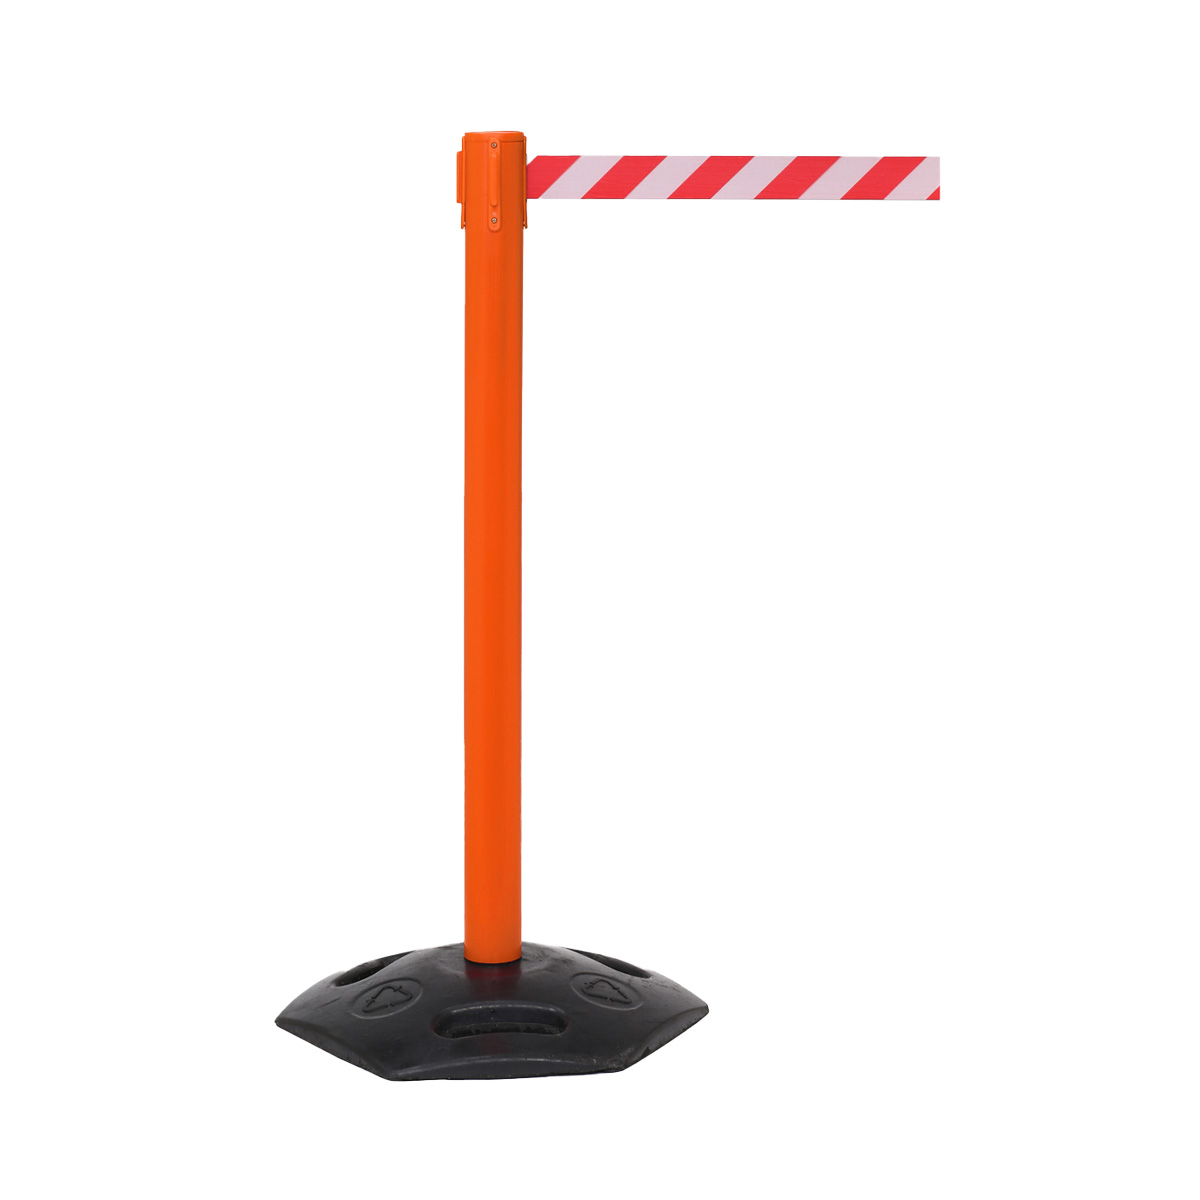 WeatherMaster Outdoor Retractable Crowd Barriers Orange Stanchion With High Visibility Red And White Chevron Tape